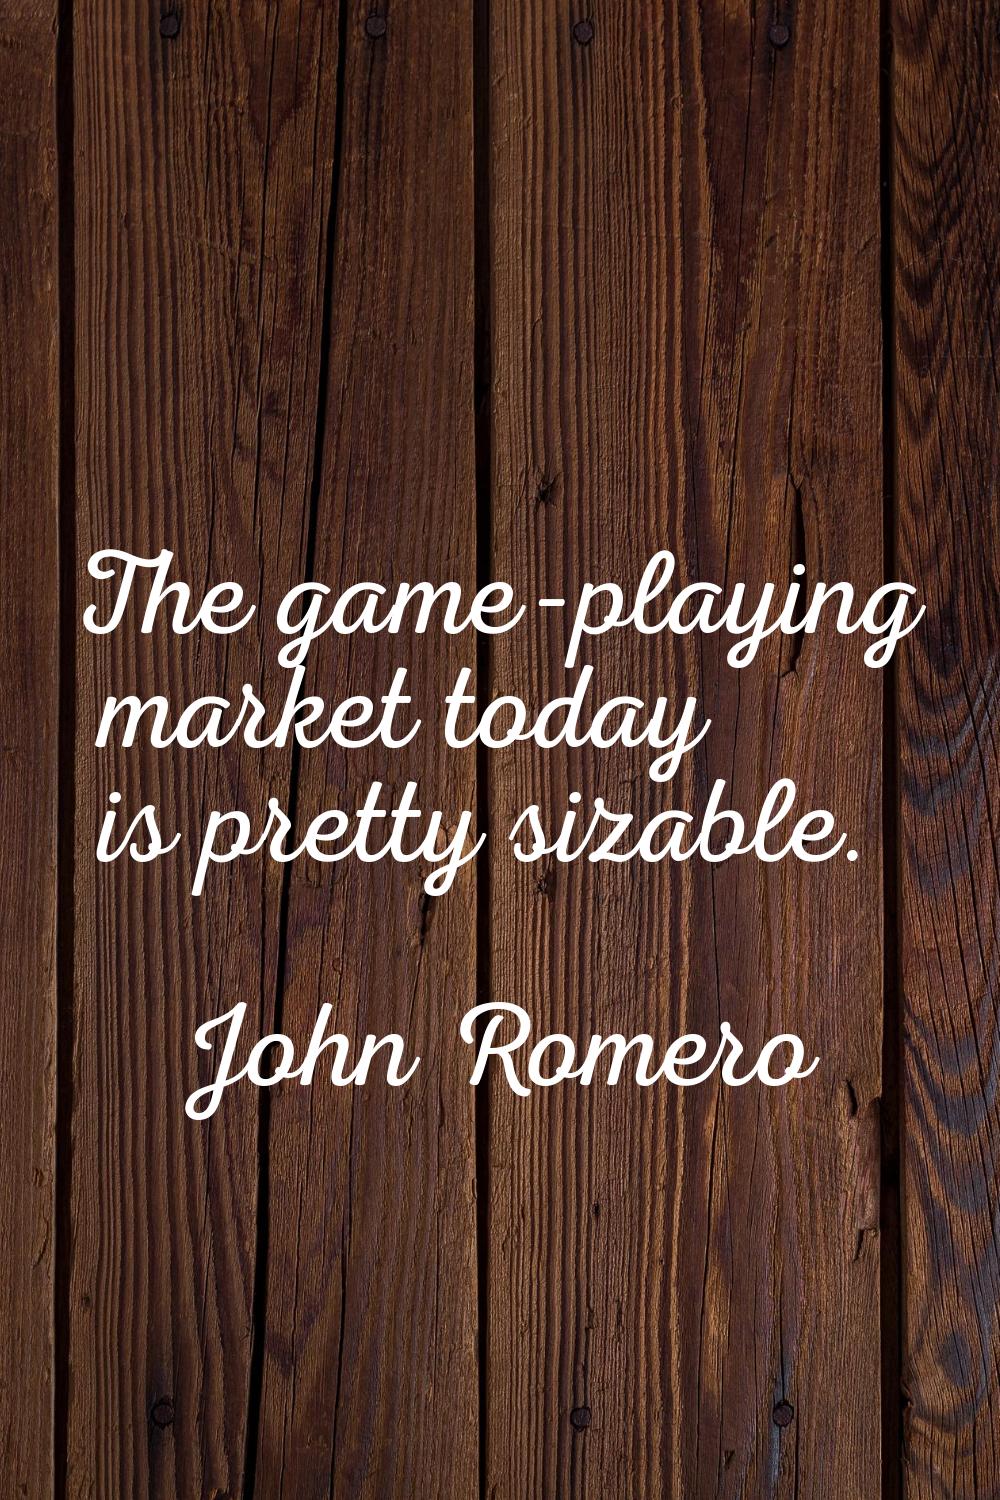 The game-playing market today is pretty sizable.